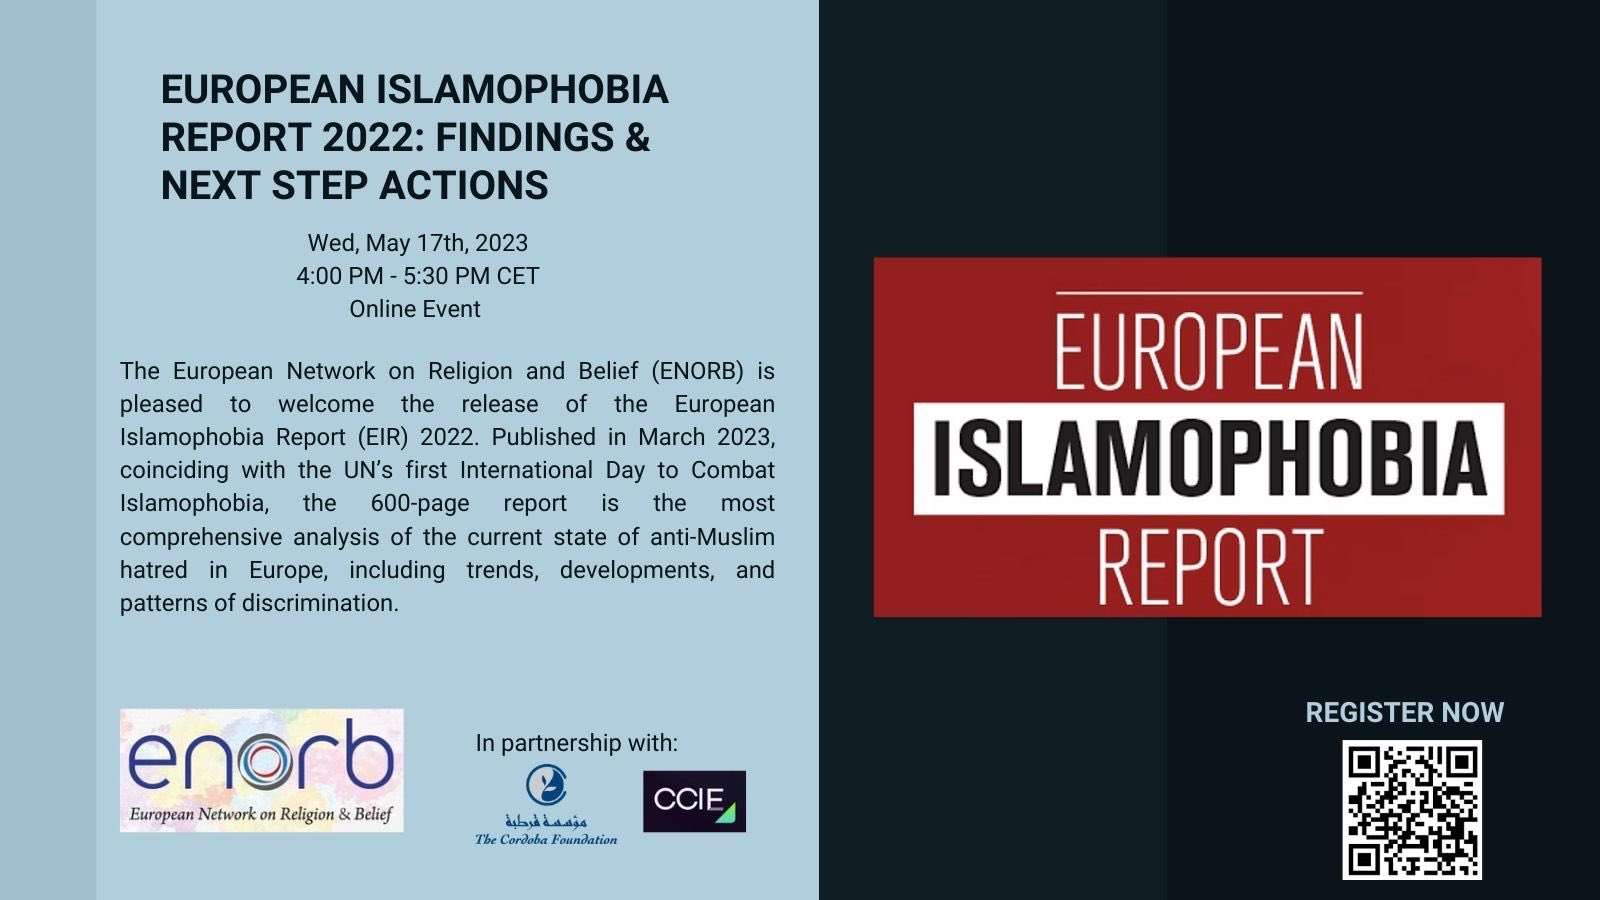 EUROPEAN ISLAMOPHOBIA REPORT 2022: FINDINGS & NEXT STEP ACTIONS